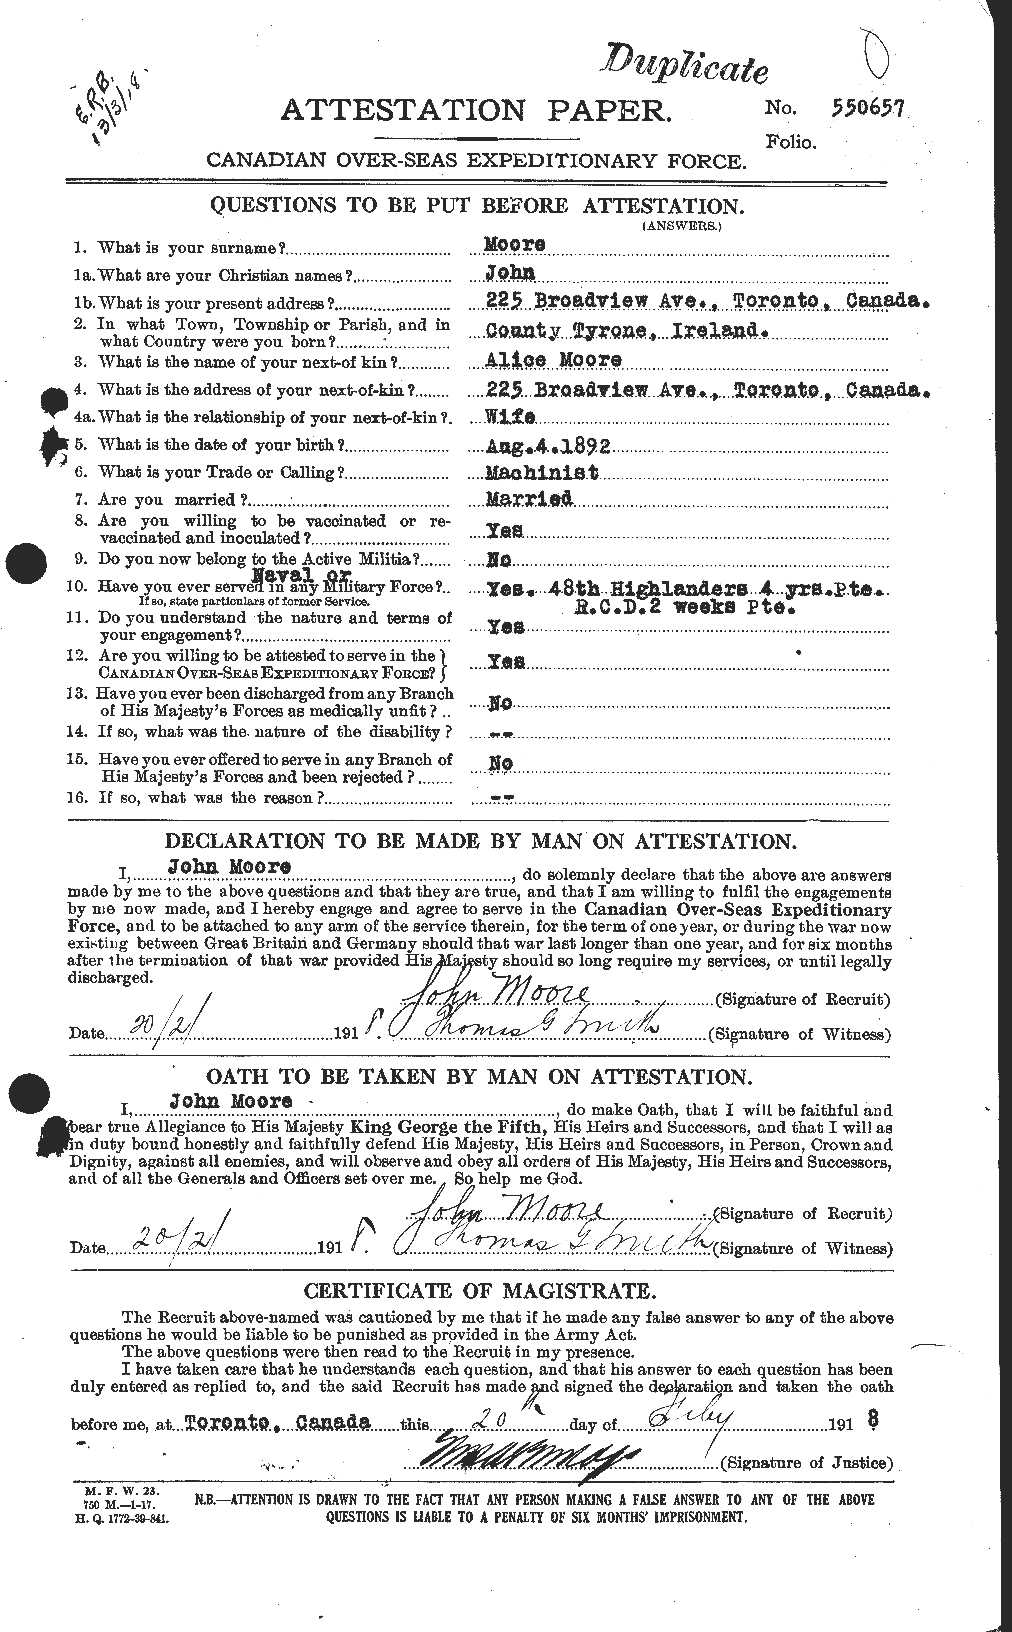 Personnel Records of the First World War - CEF 503225a